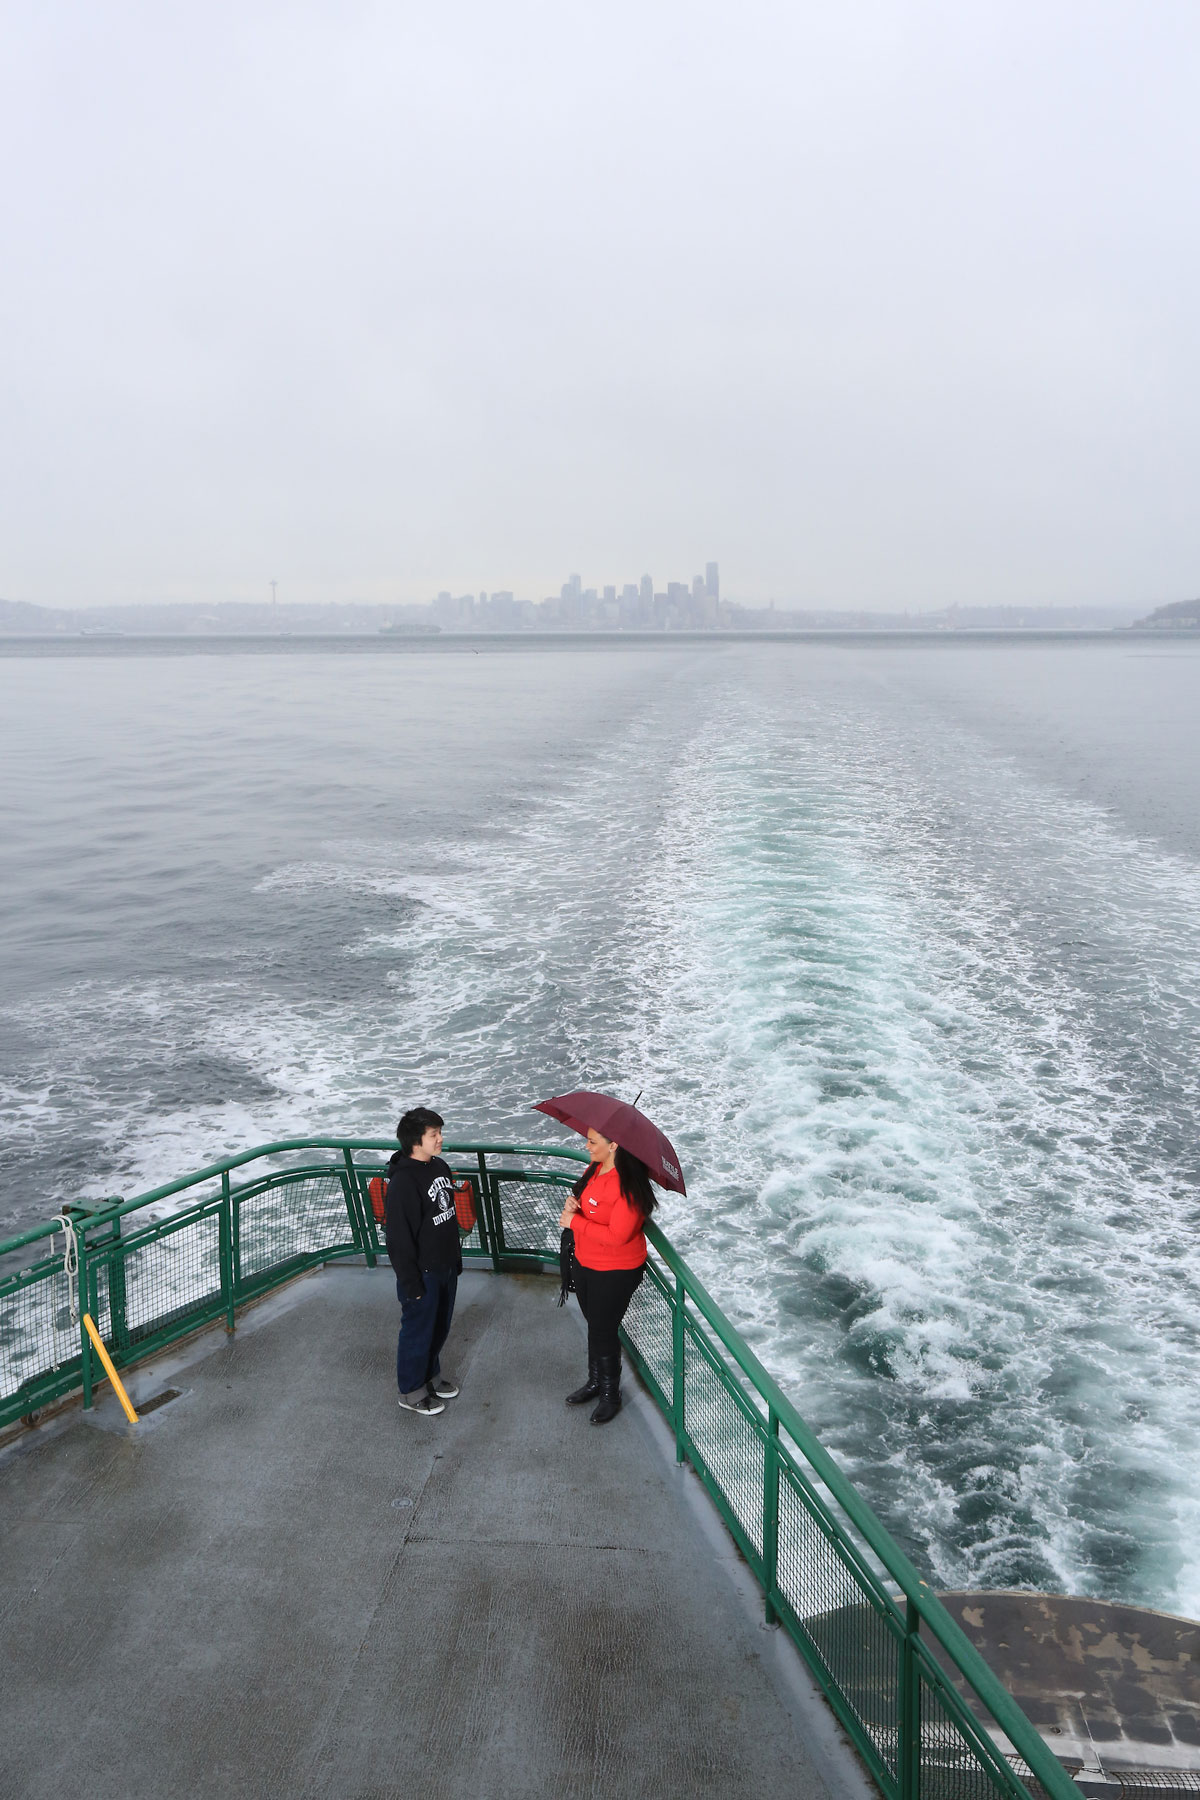 Two ϲֳ students on a Washington State Ferry.